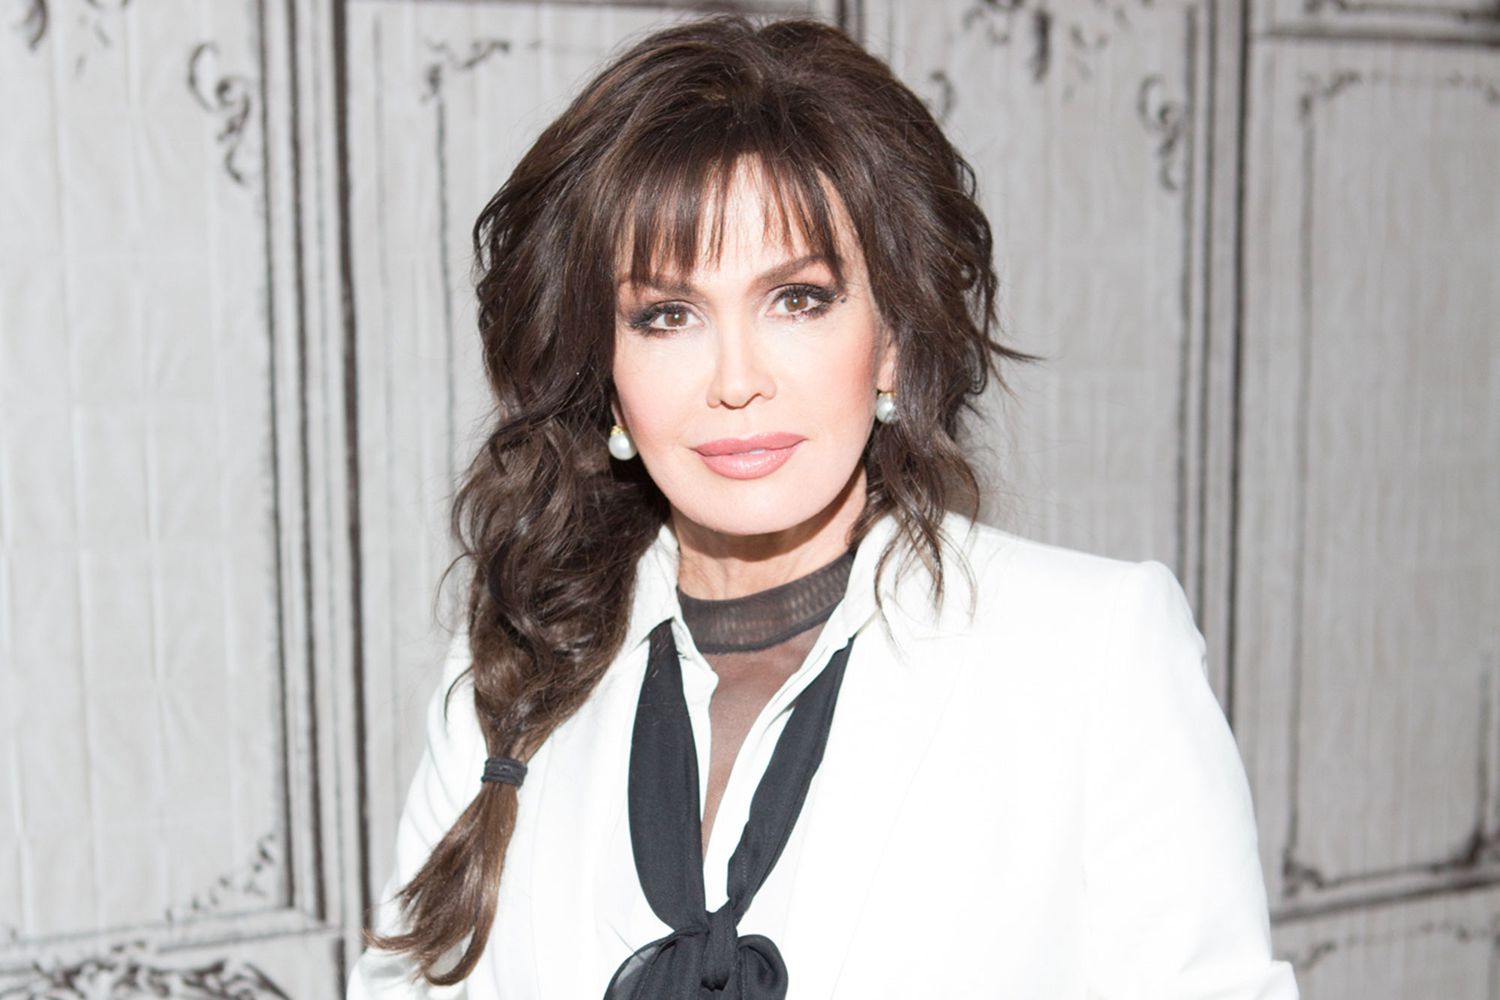 Marie Osmond says a producer body-shamed her on set of ‘Donny & Marie’